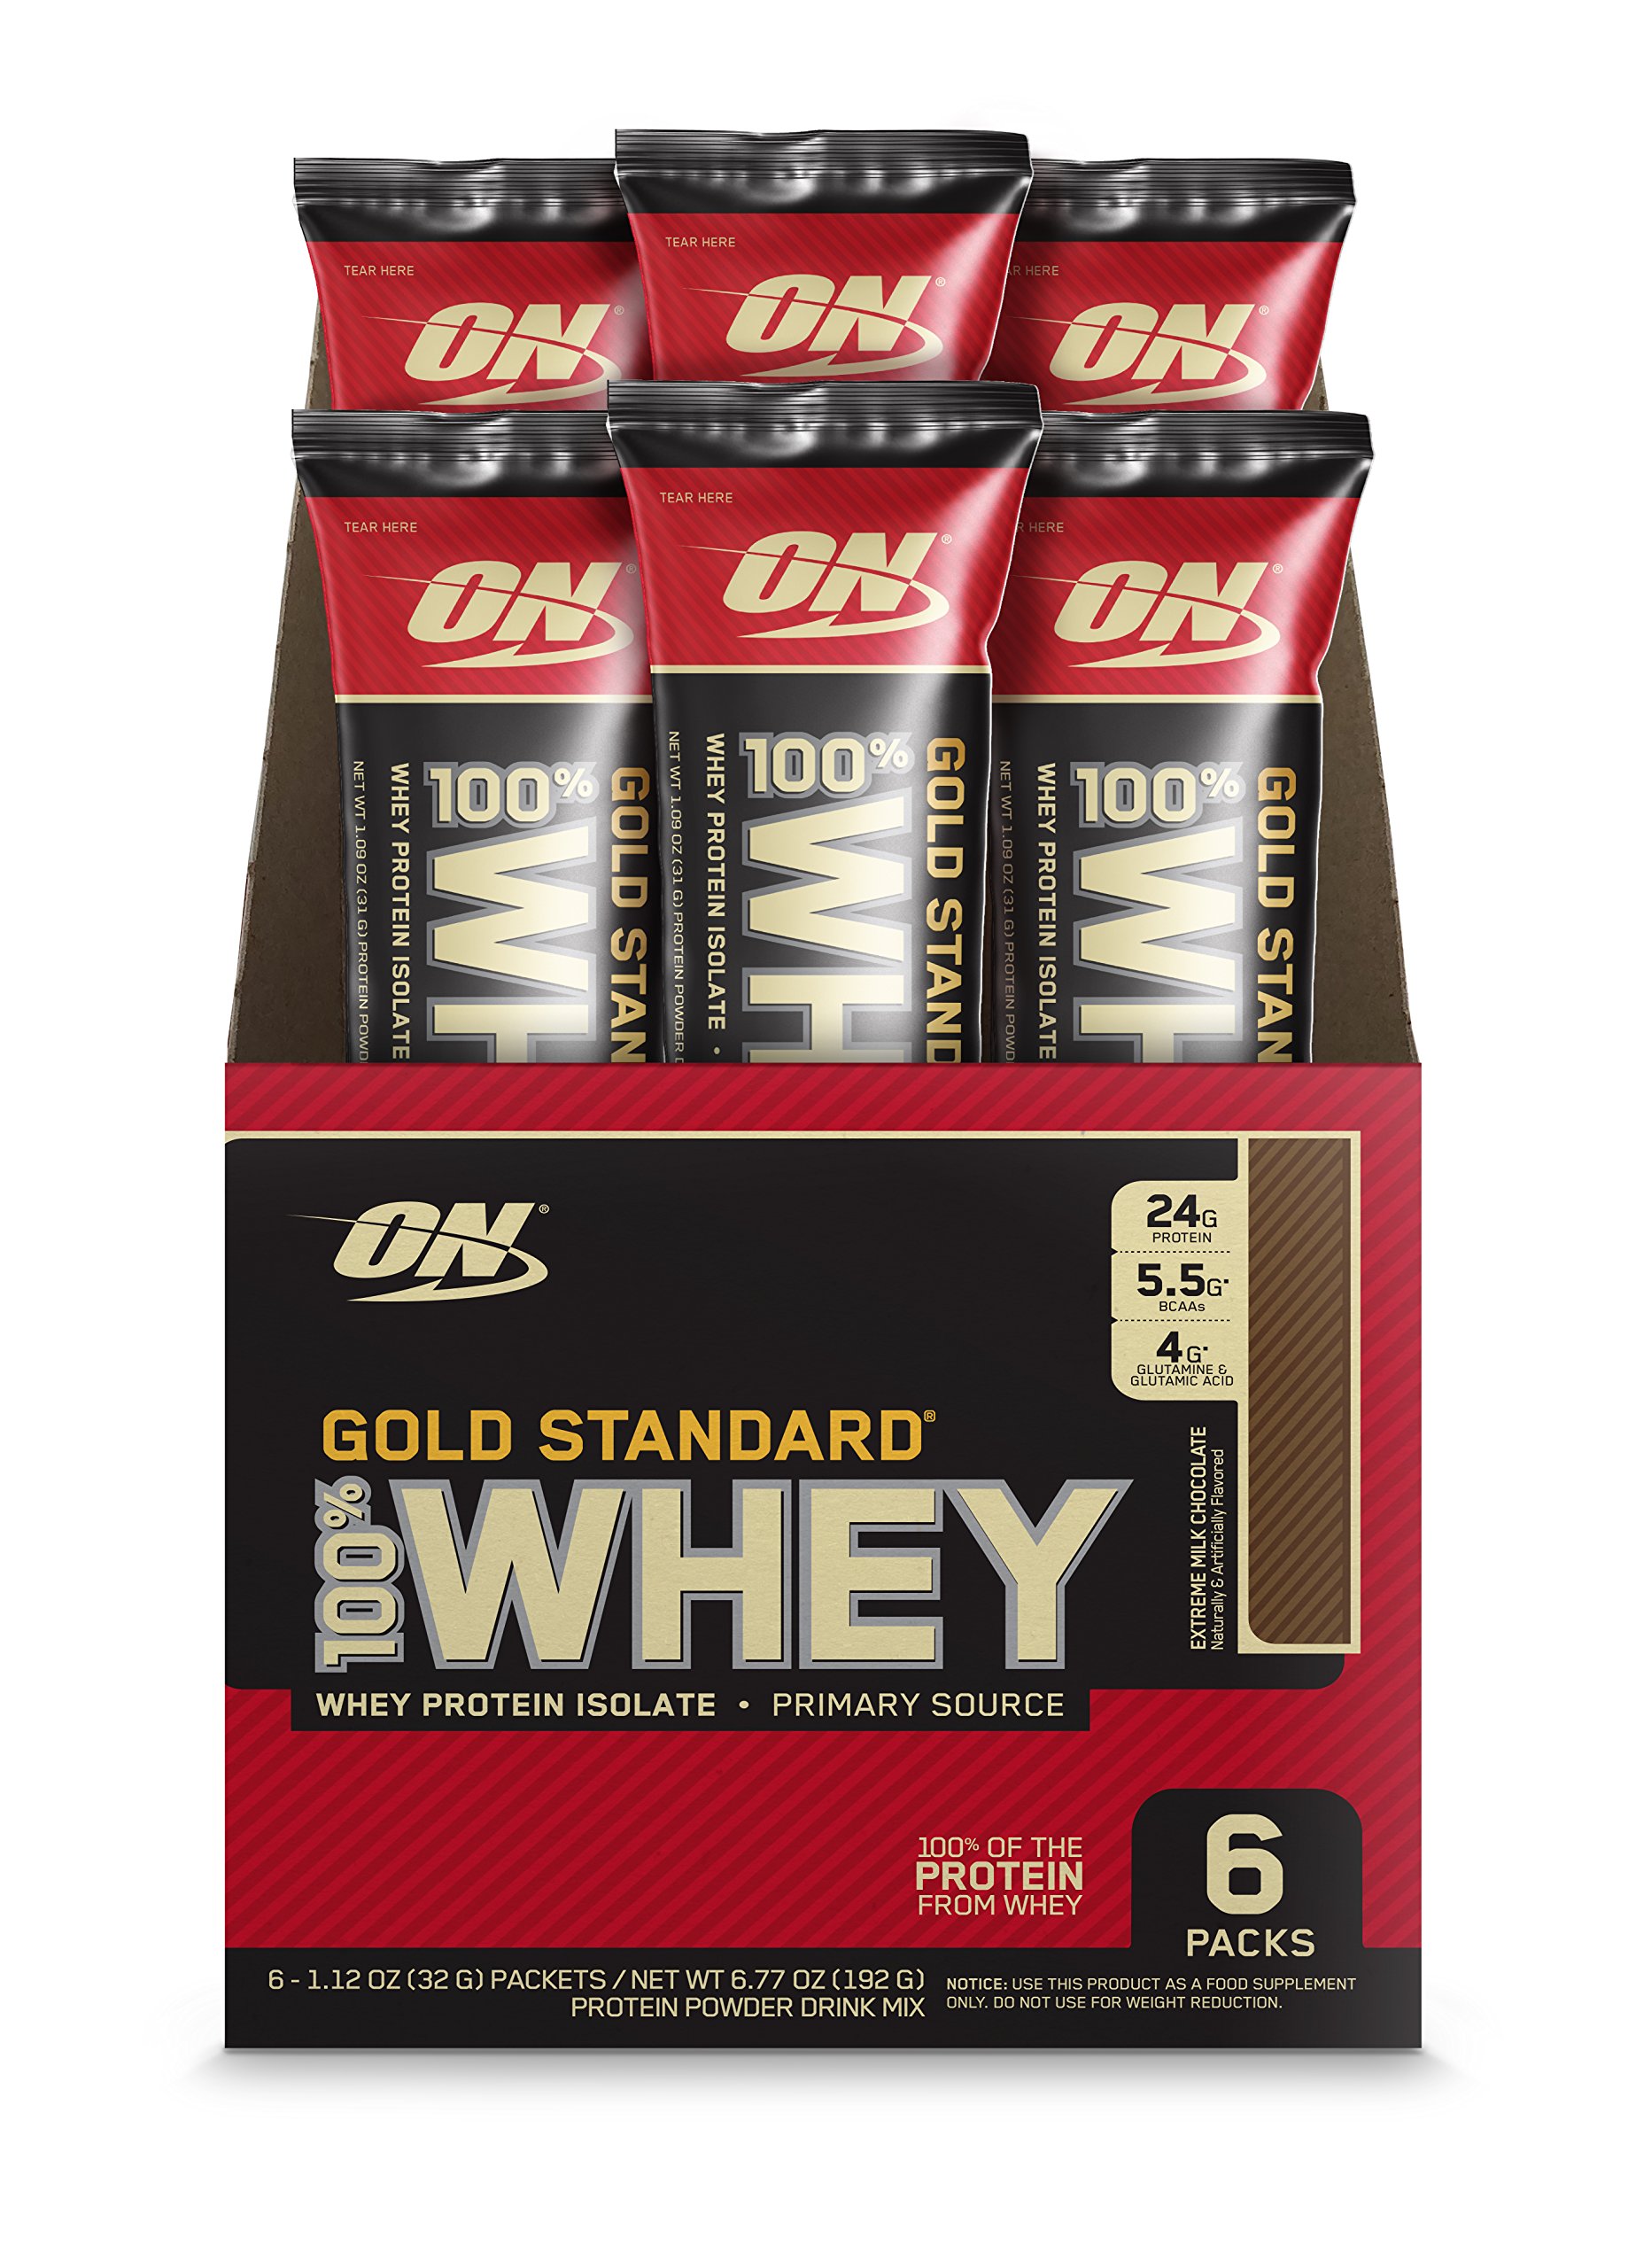 gold standard whey instructions